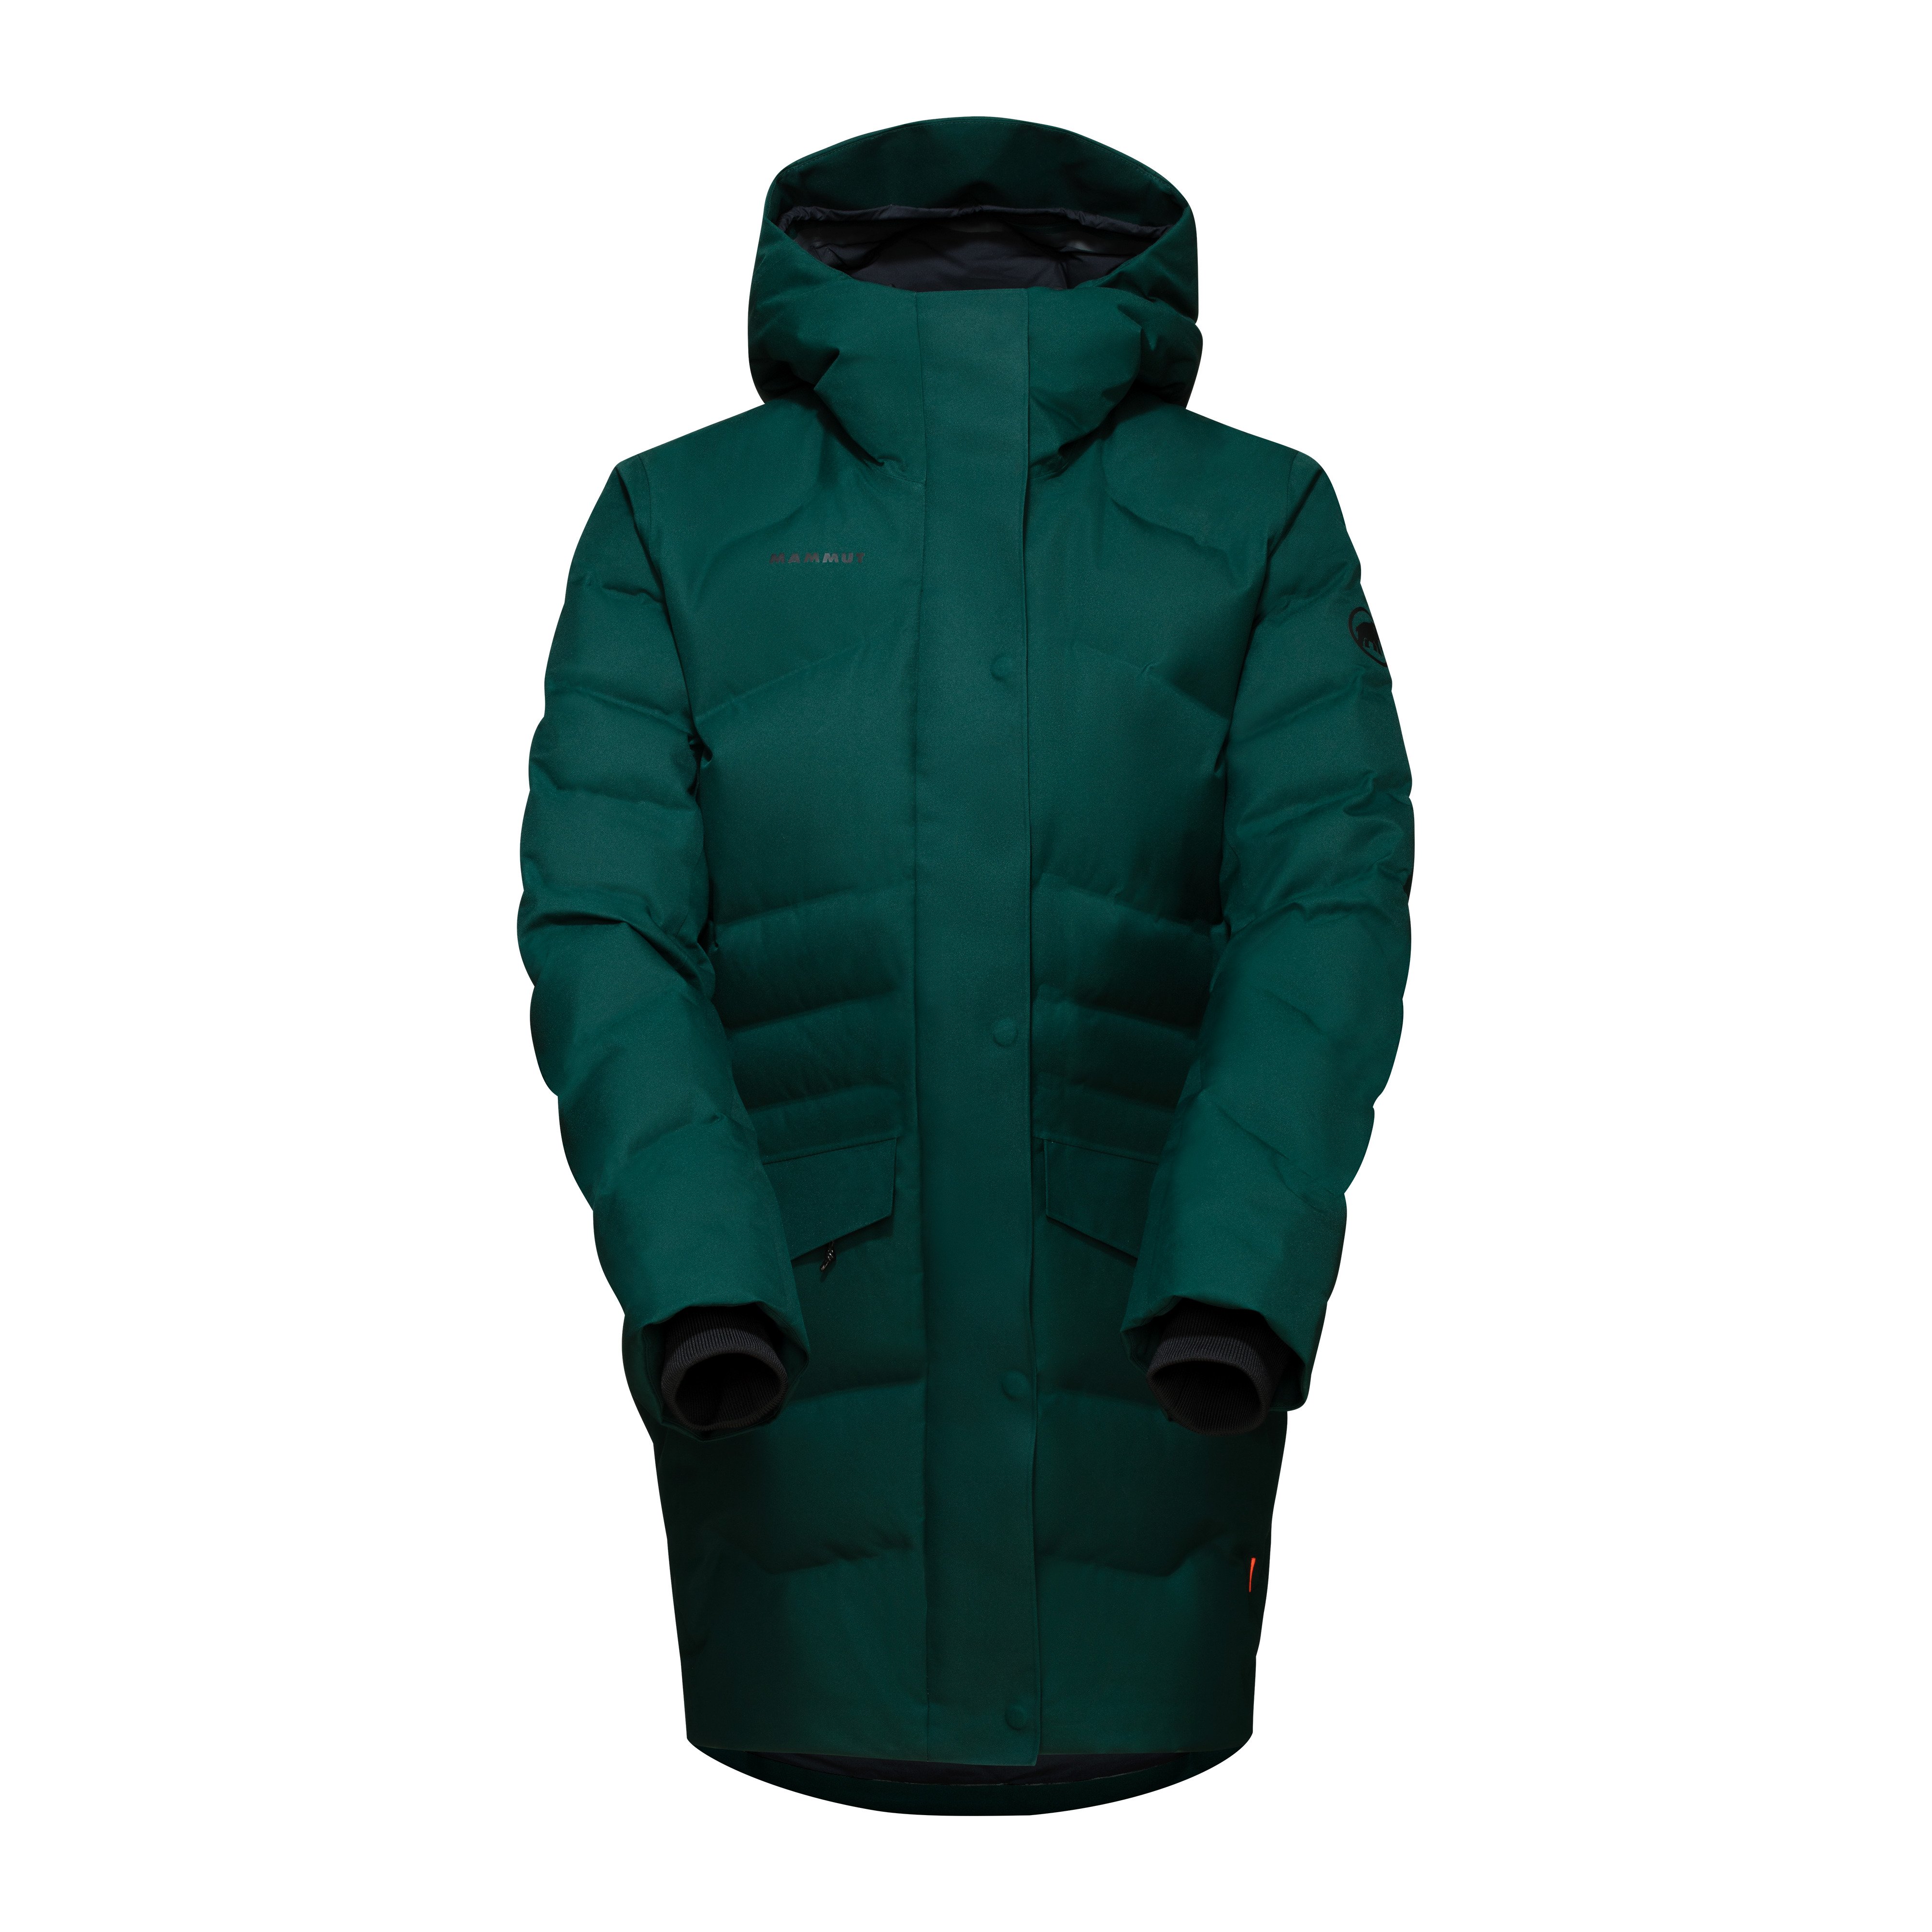 Photics HS Thermo Parka Women - dark teal, S product image